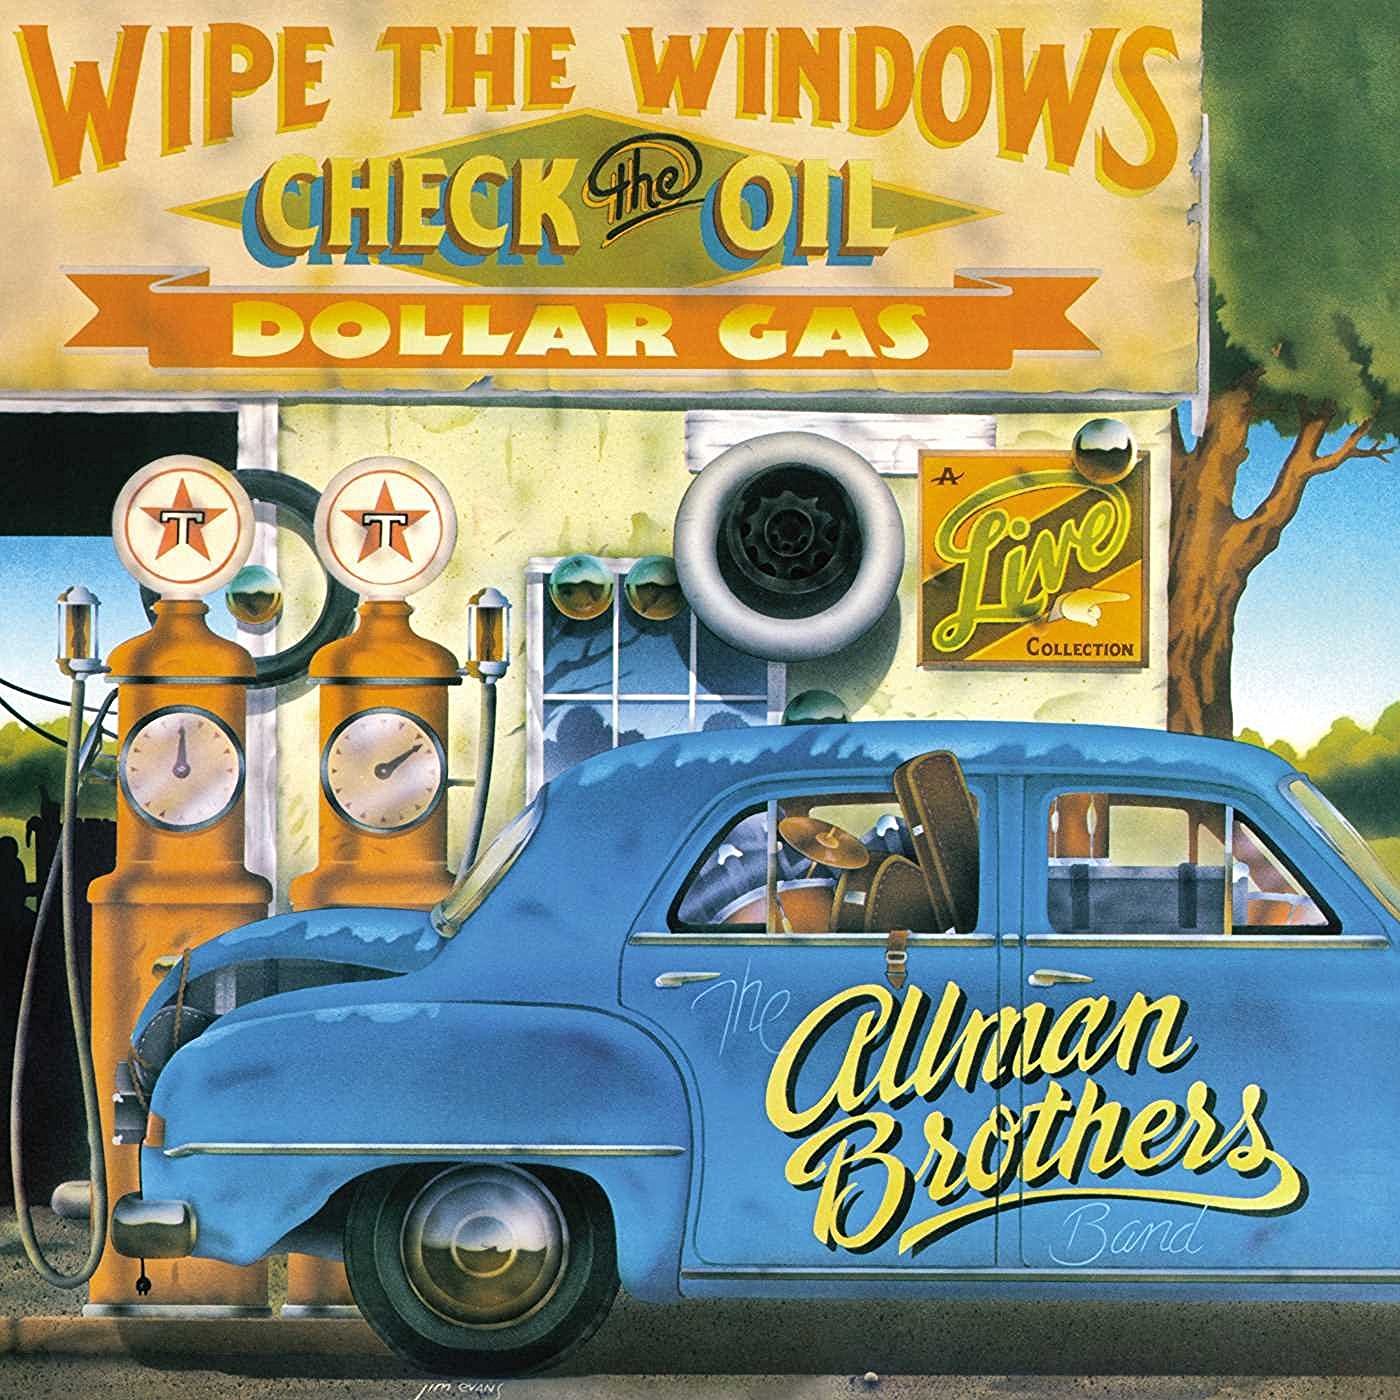 Wipe The Windows, Check The Oil, Dollar Gas - Vinyl | Allman Brothers Band